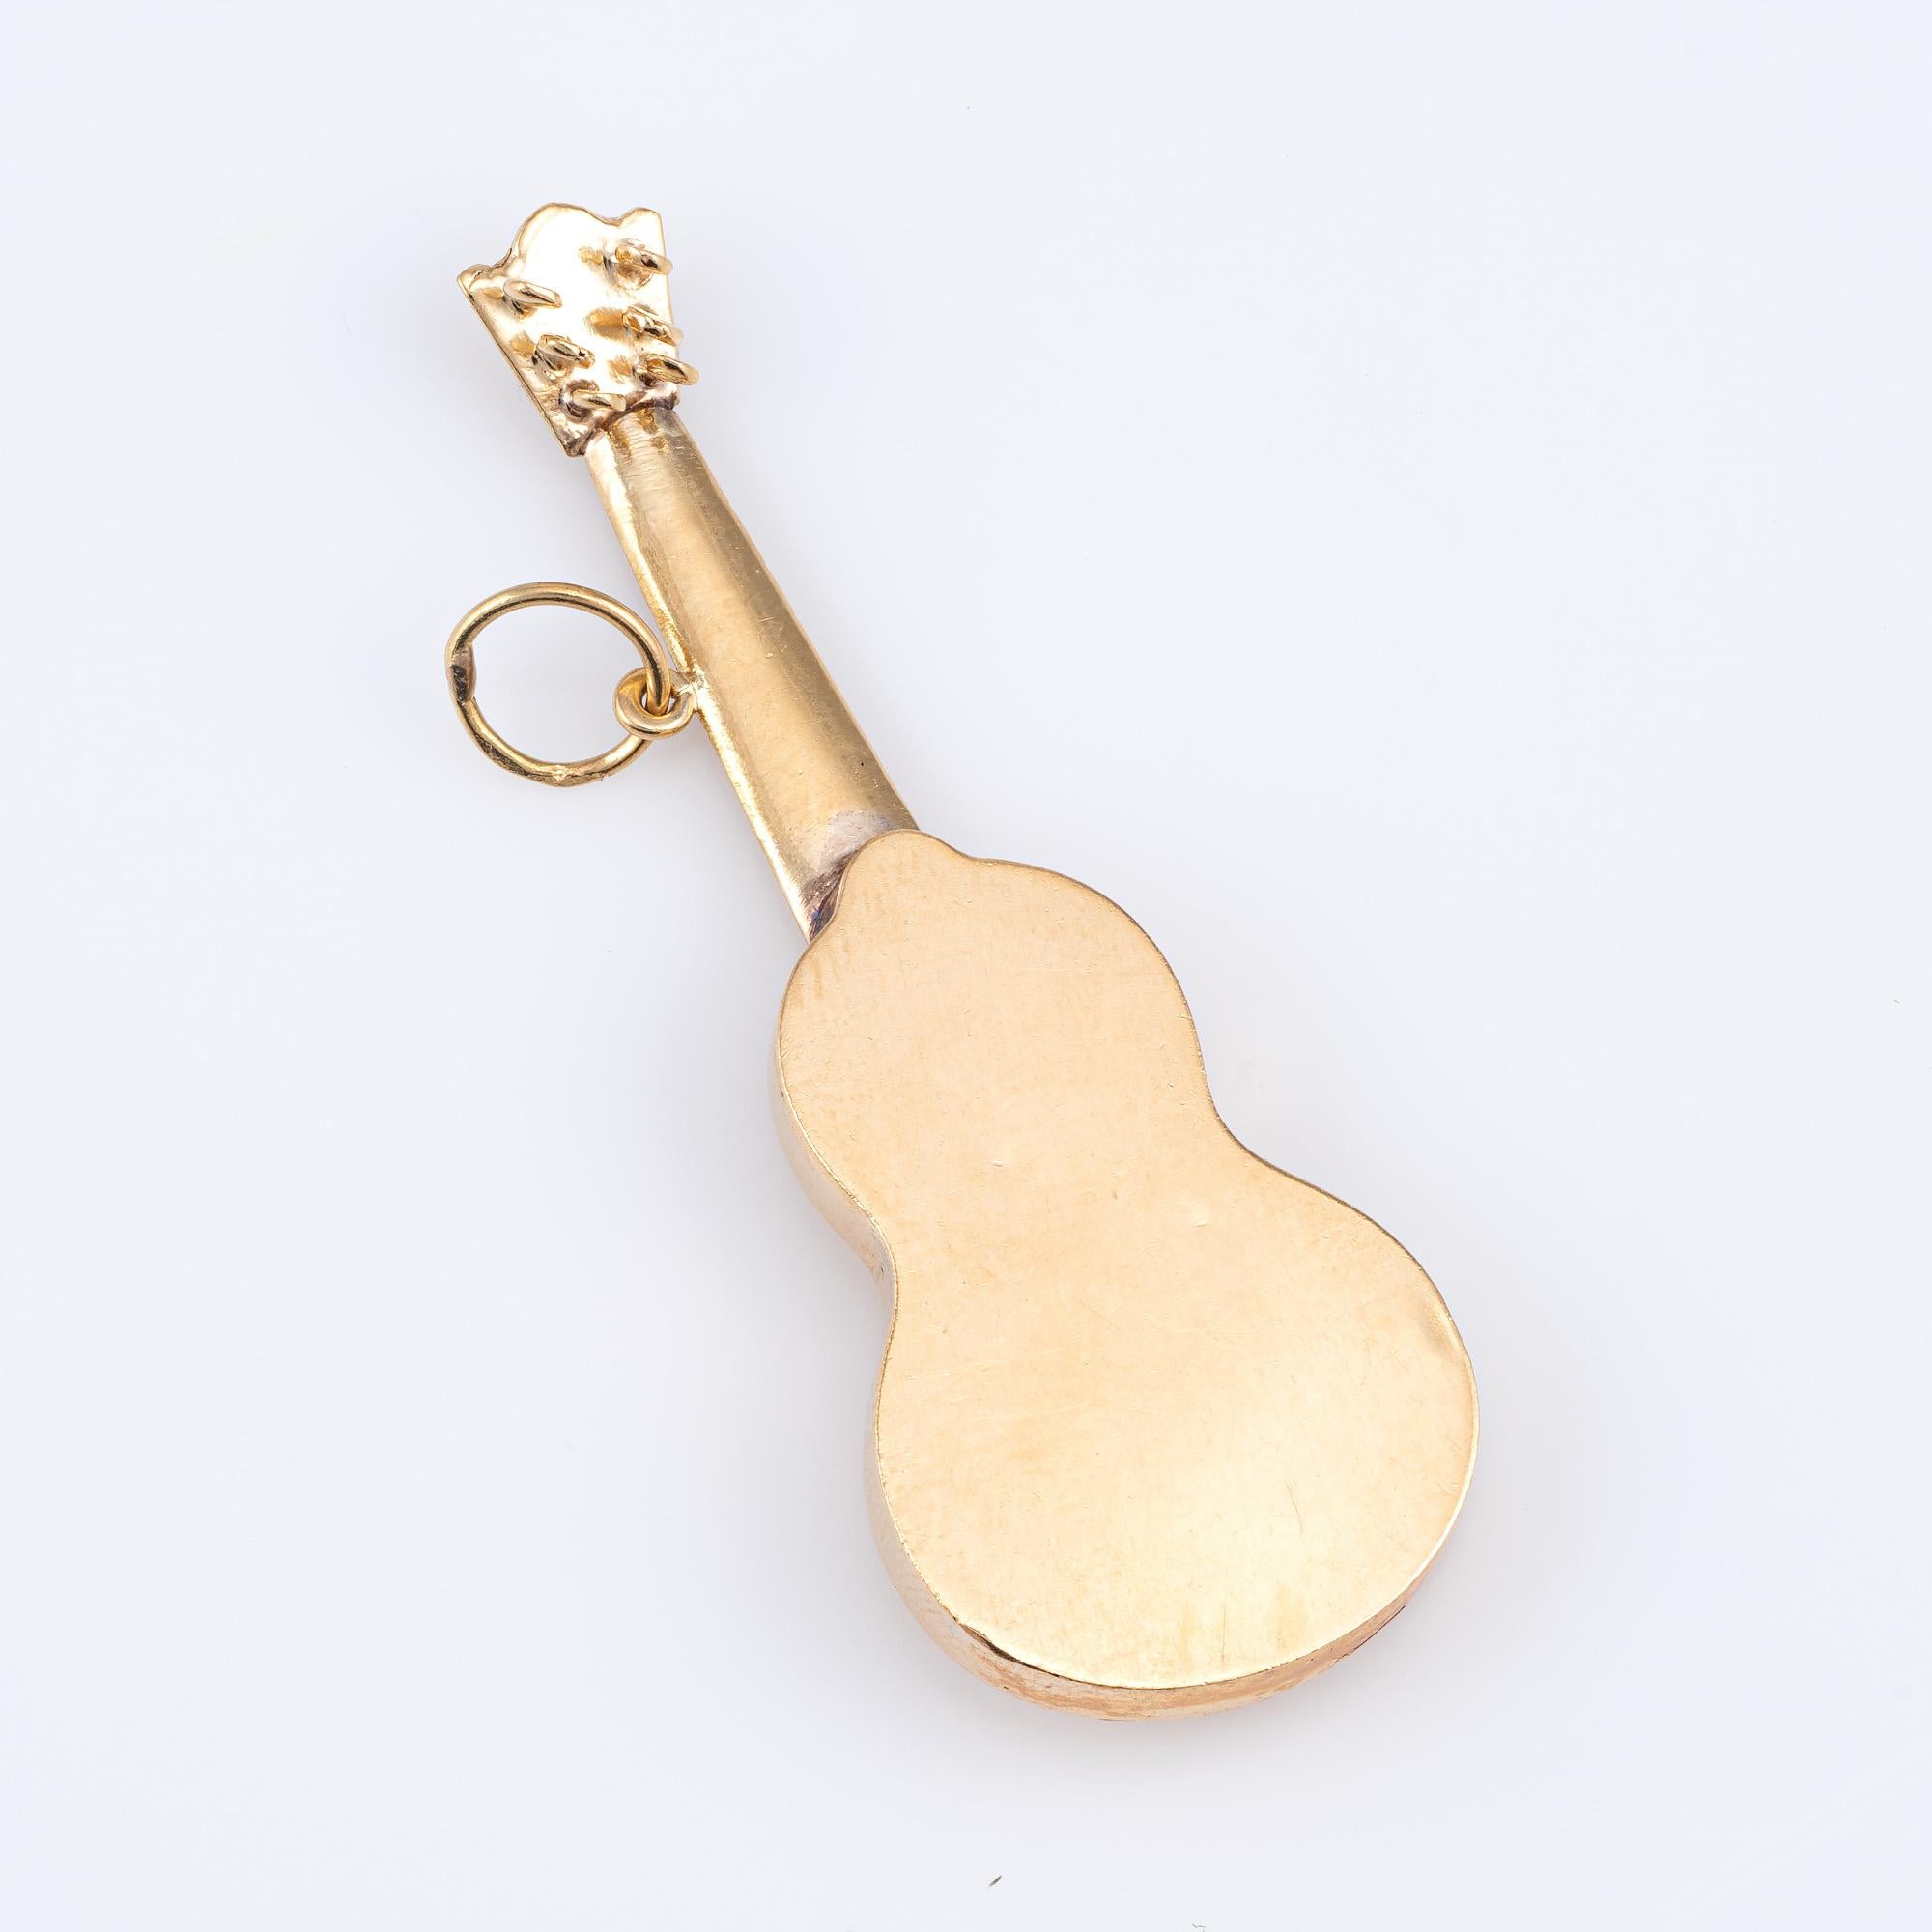 Finely detailed acoustic guitar pendant crafted in 18k yellow gold (circa 1970s).  

The nicely detailed pendant features three-dimensional detail that realistically depicts an acoustic guitar.    

The pendant is in very good condition. We have not